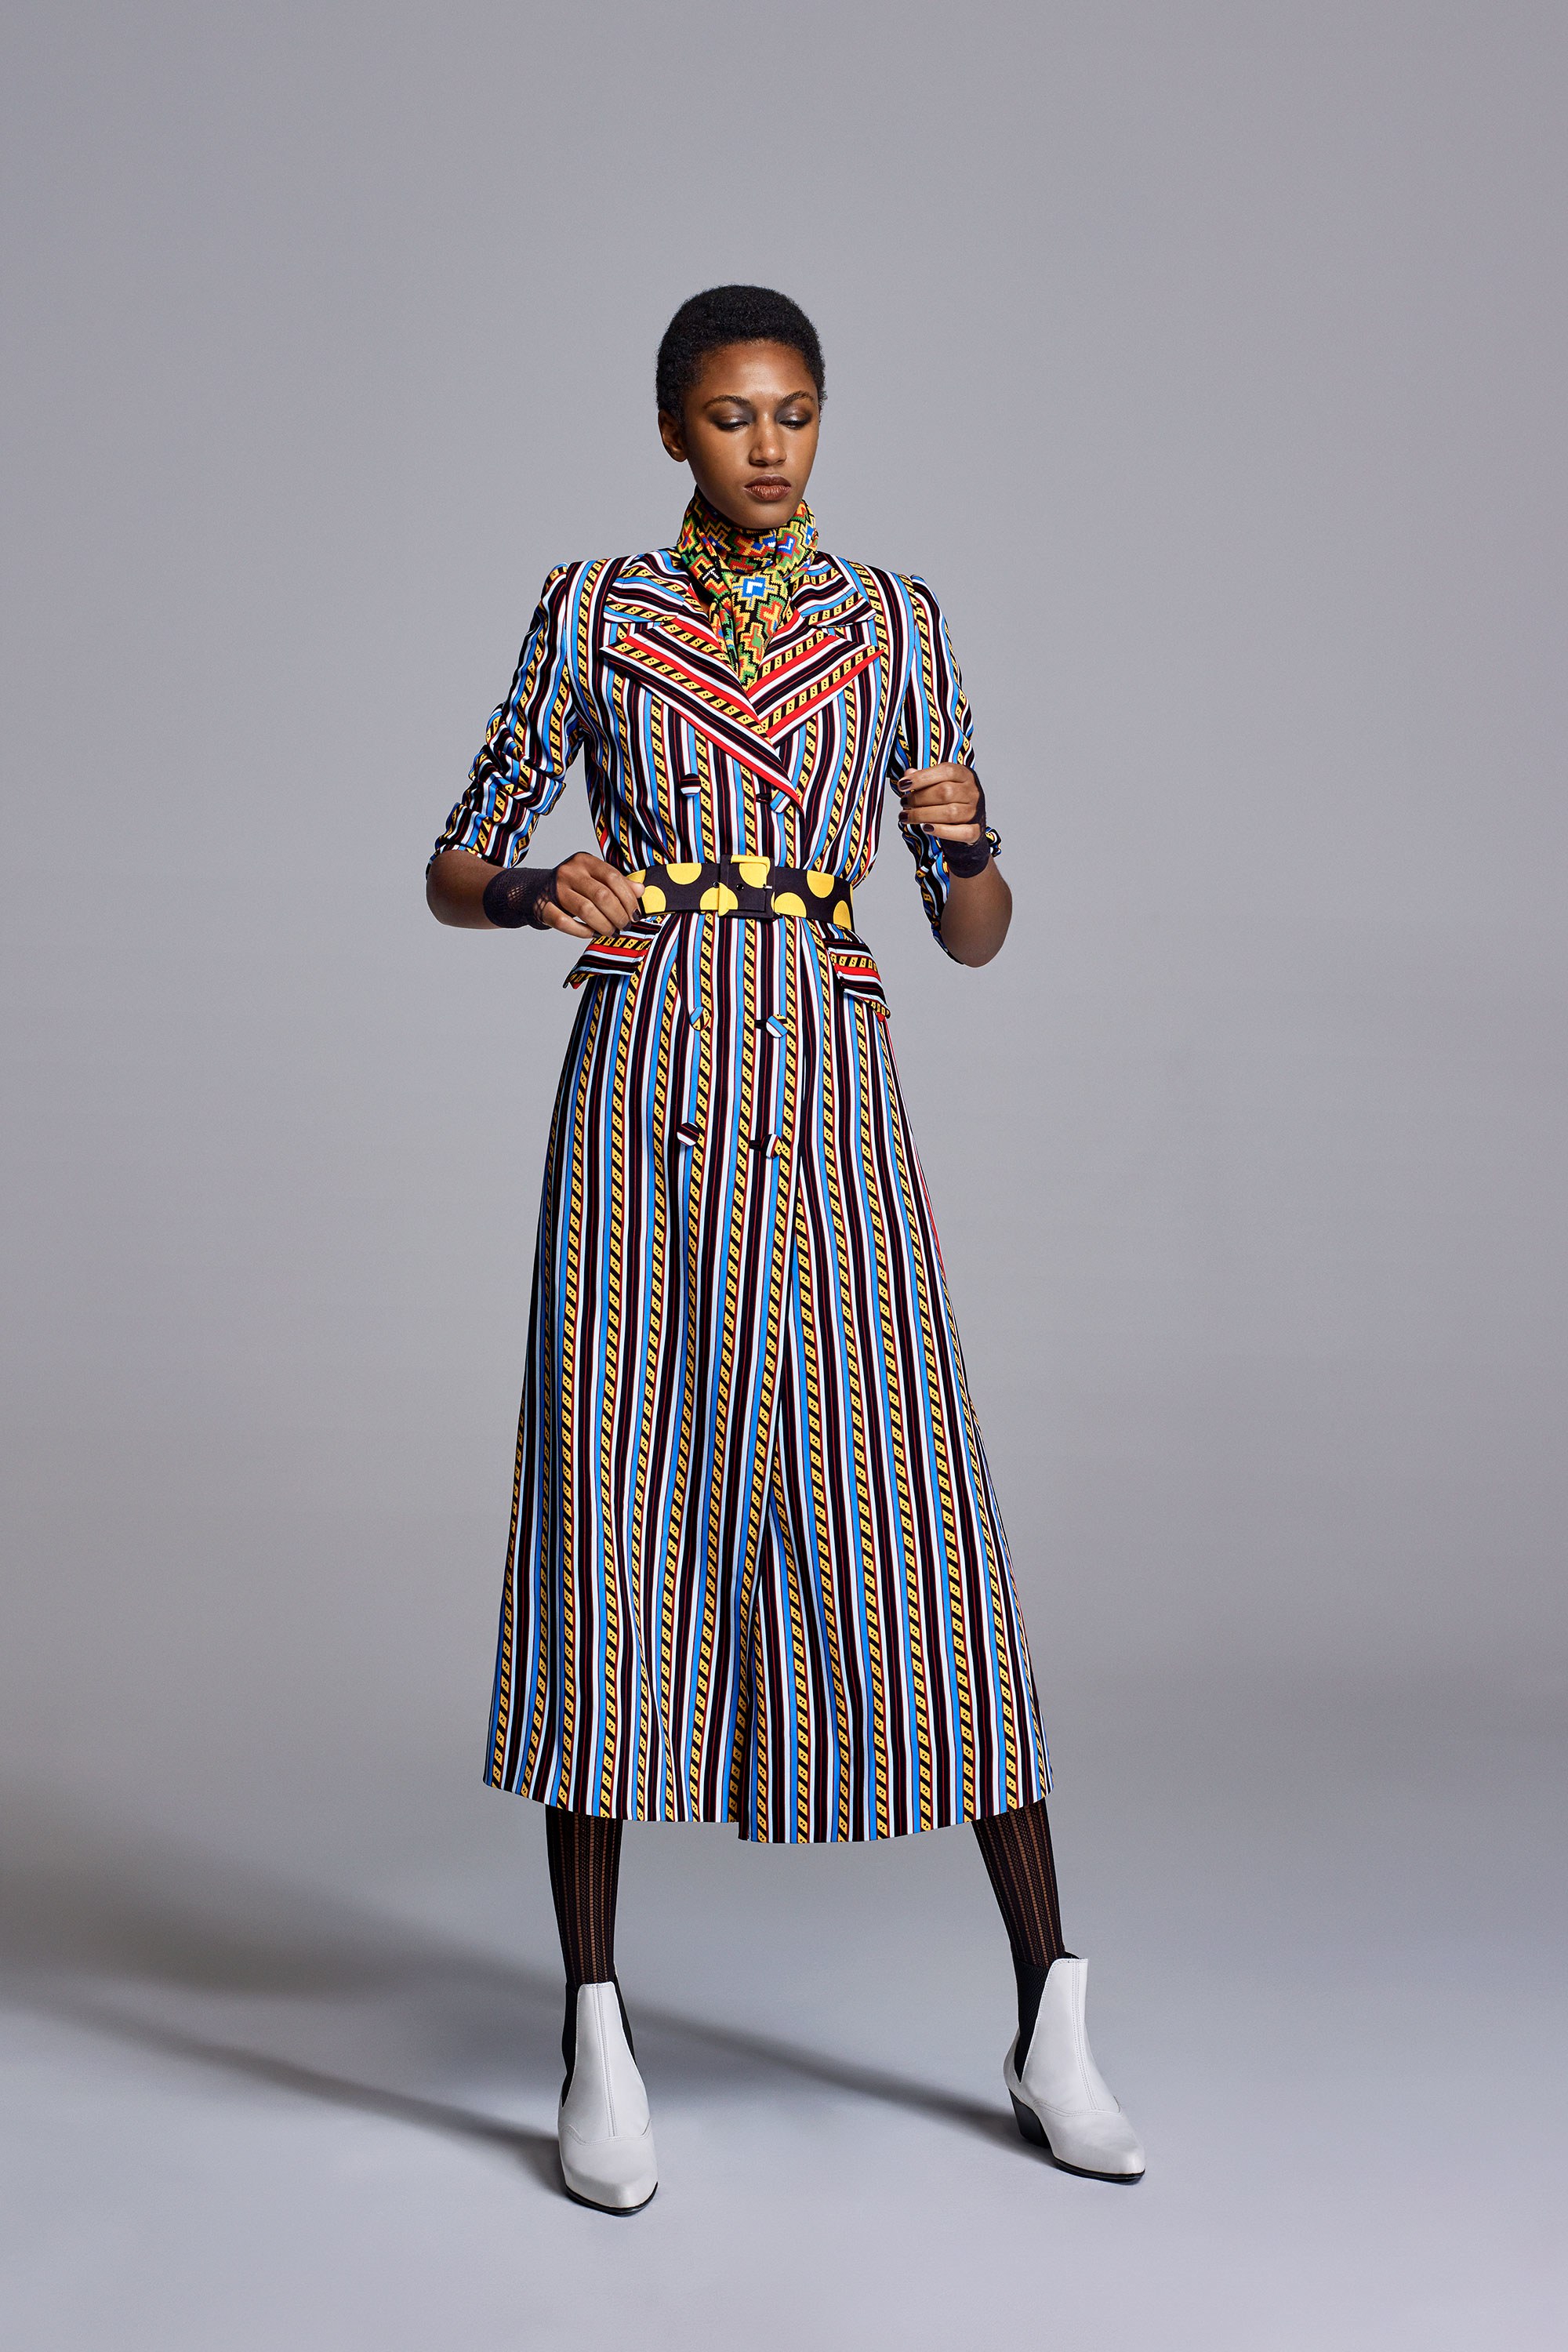 vibrant-colours-perfectly-tailored-outfits-make-duro-olowus-fall-2018-collection-released-london-fashion-week-2018